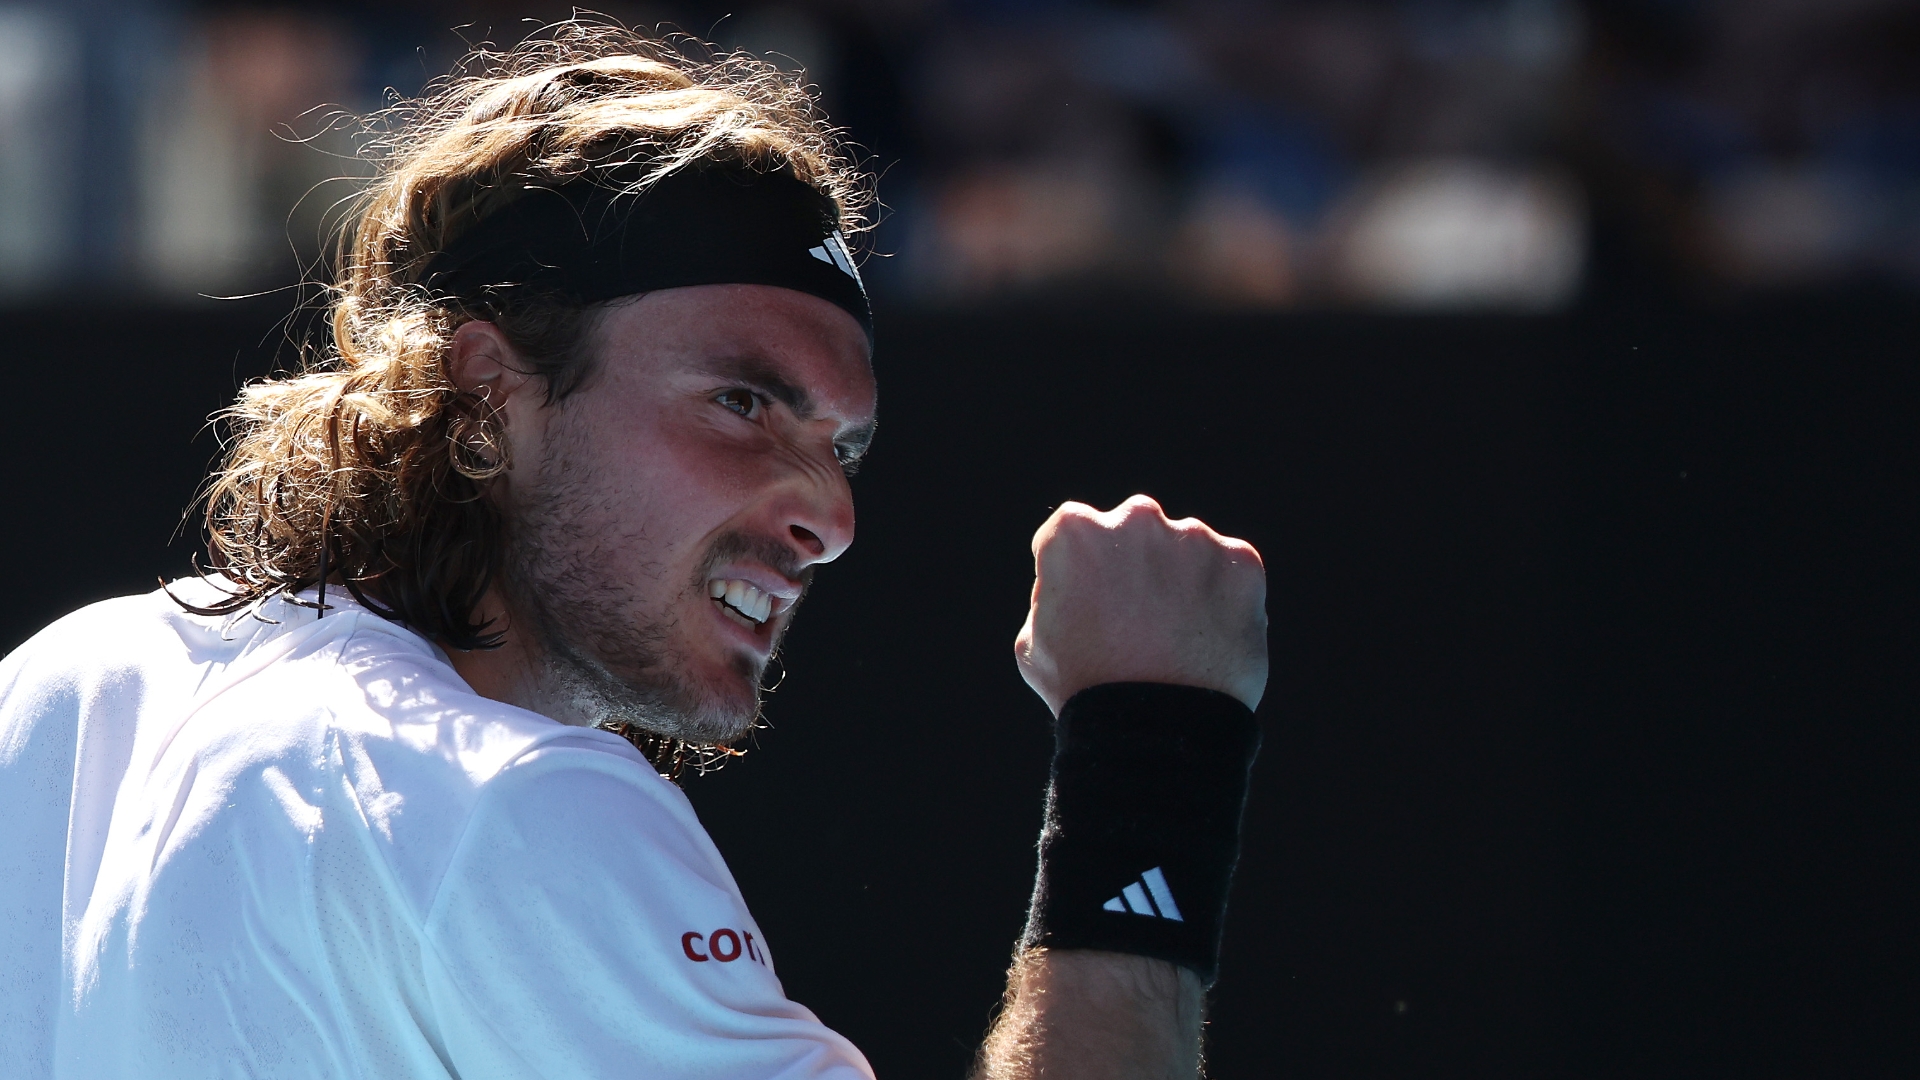 Tsitsipas somehow prevails to win magnificent rally